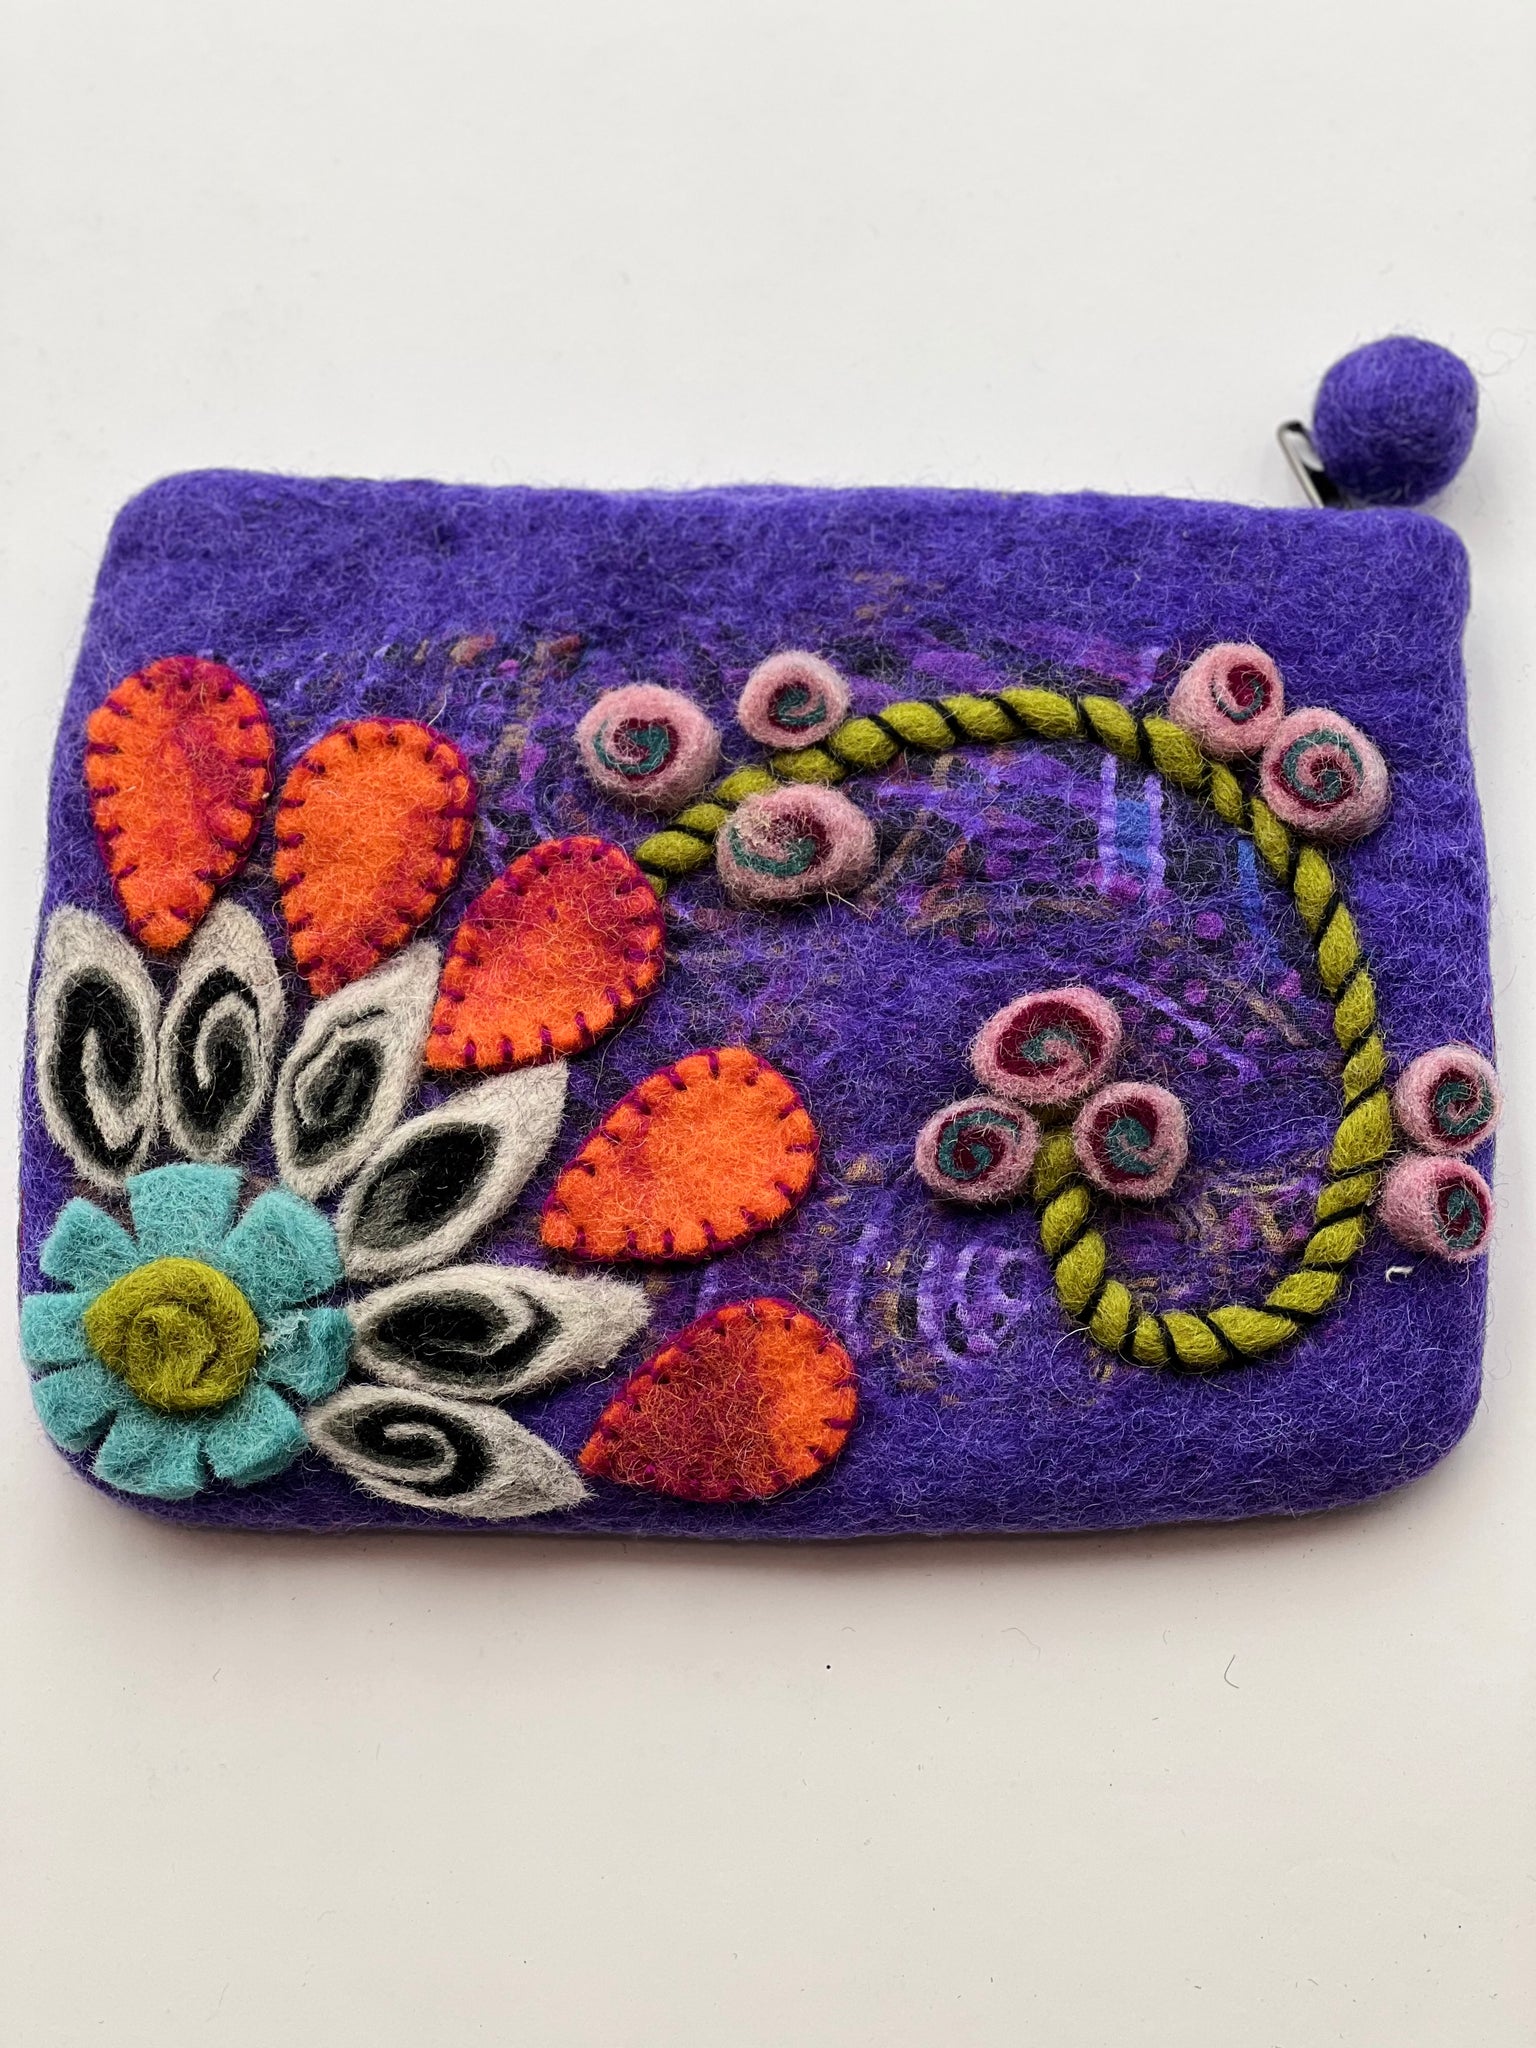 PURSE MADE OF WOOL FELT WITH ZIPPER/p pROUND SHAPE WITH